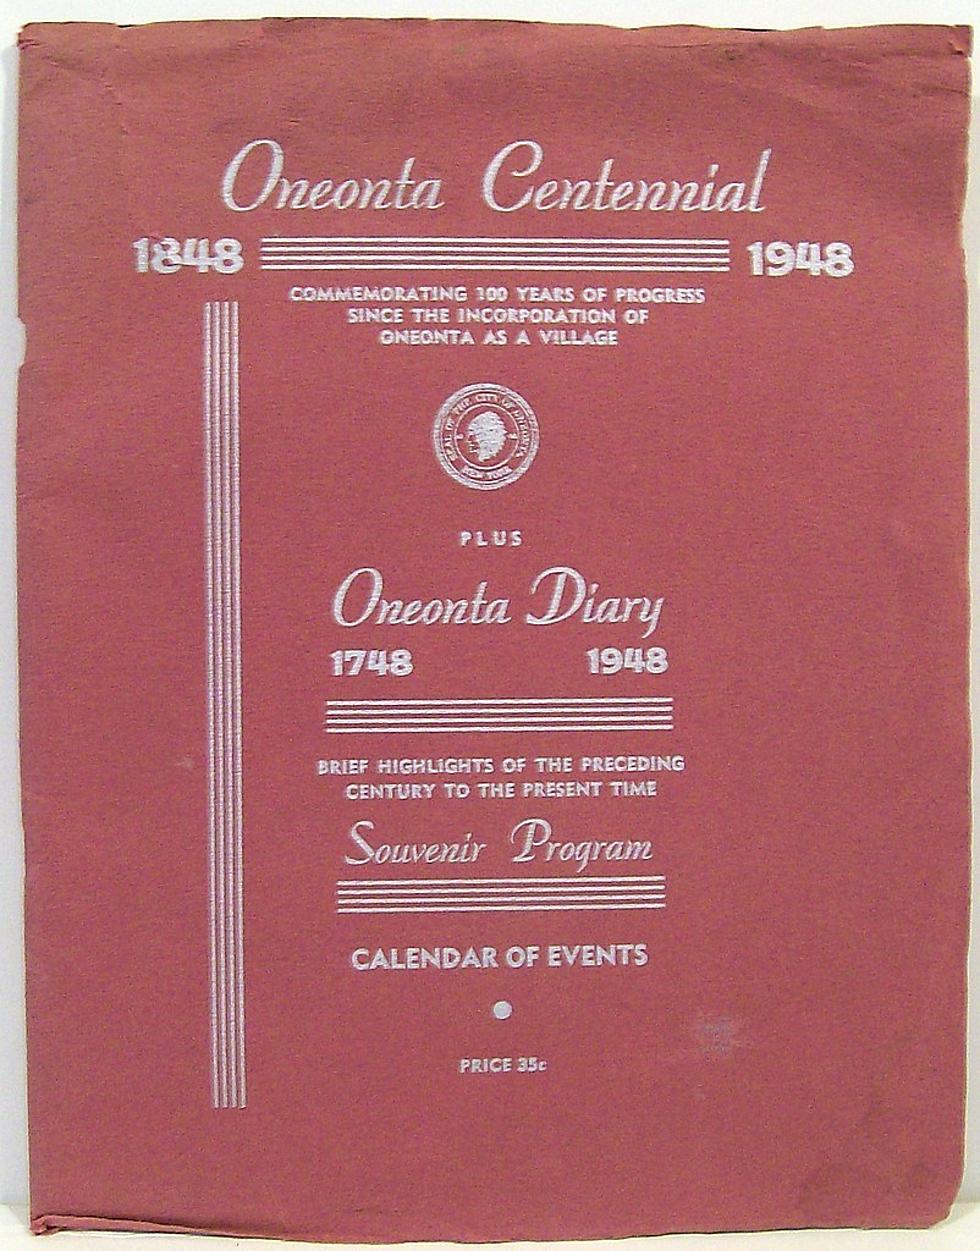 Big Chuck’s Monday Morning Time Capsule:  Oneonta Celebrates It’s Centennial in 1948!